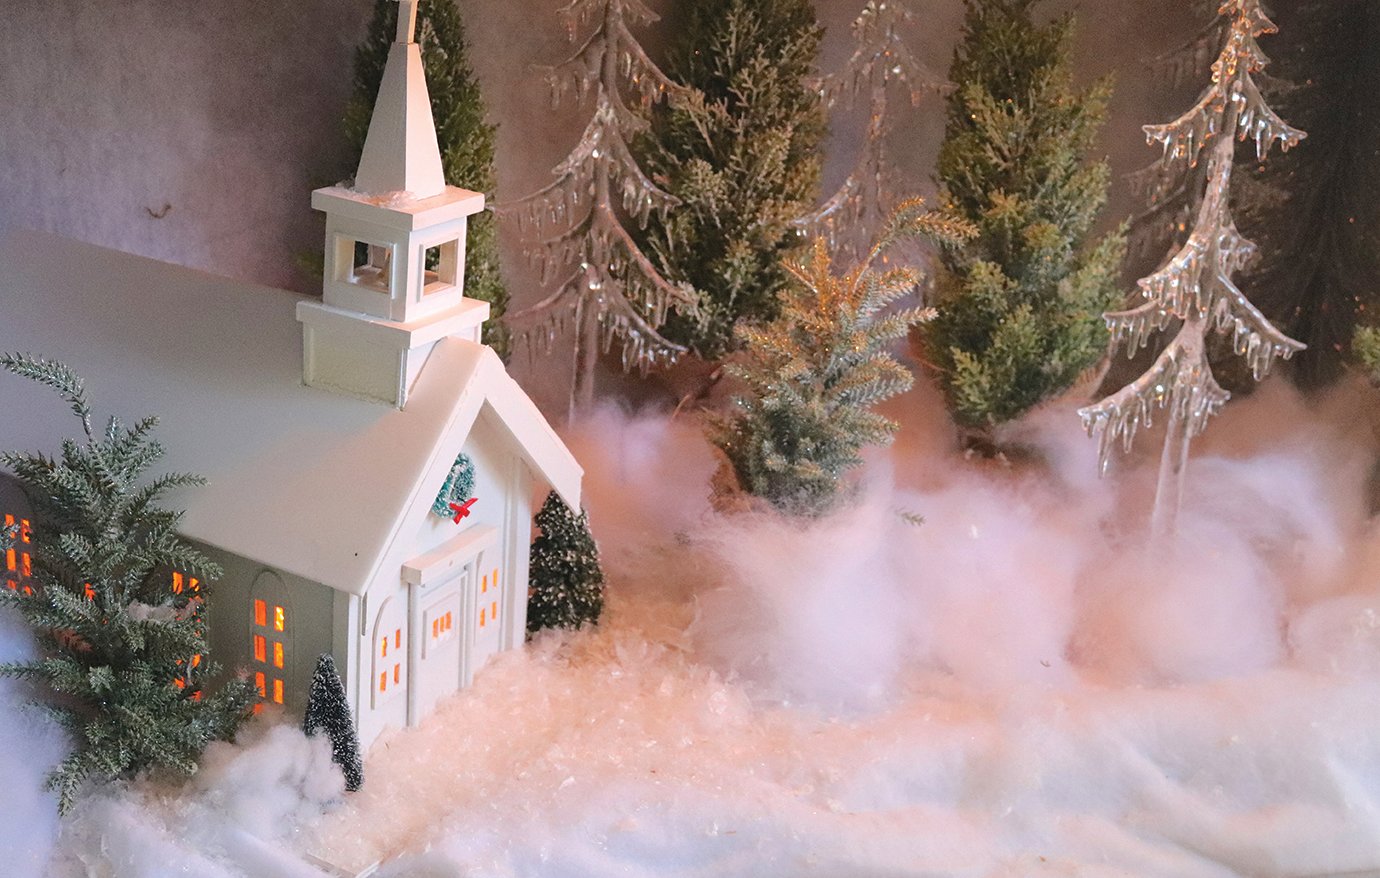 A minature church created by Richard Peterman is depicted in a winter wonderland as part of a decorative piece adorning the Peterman home.